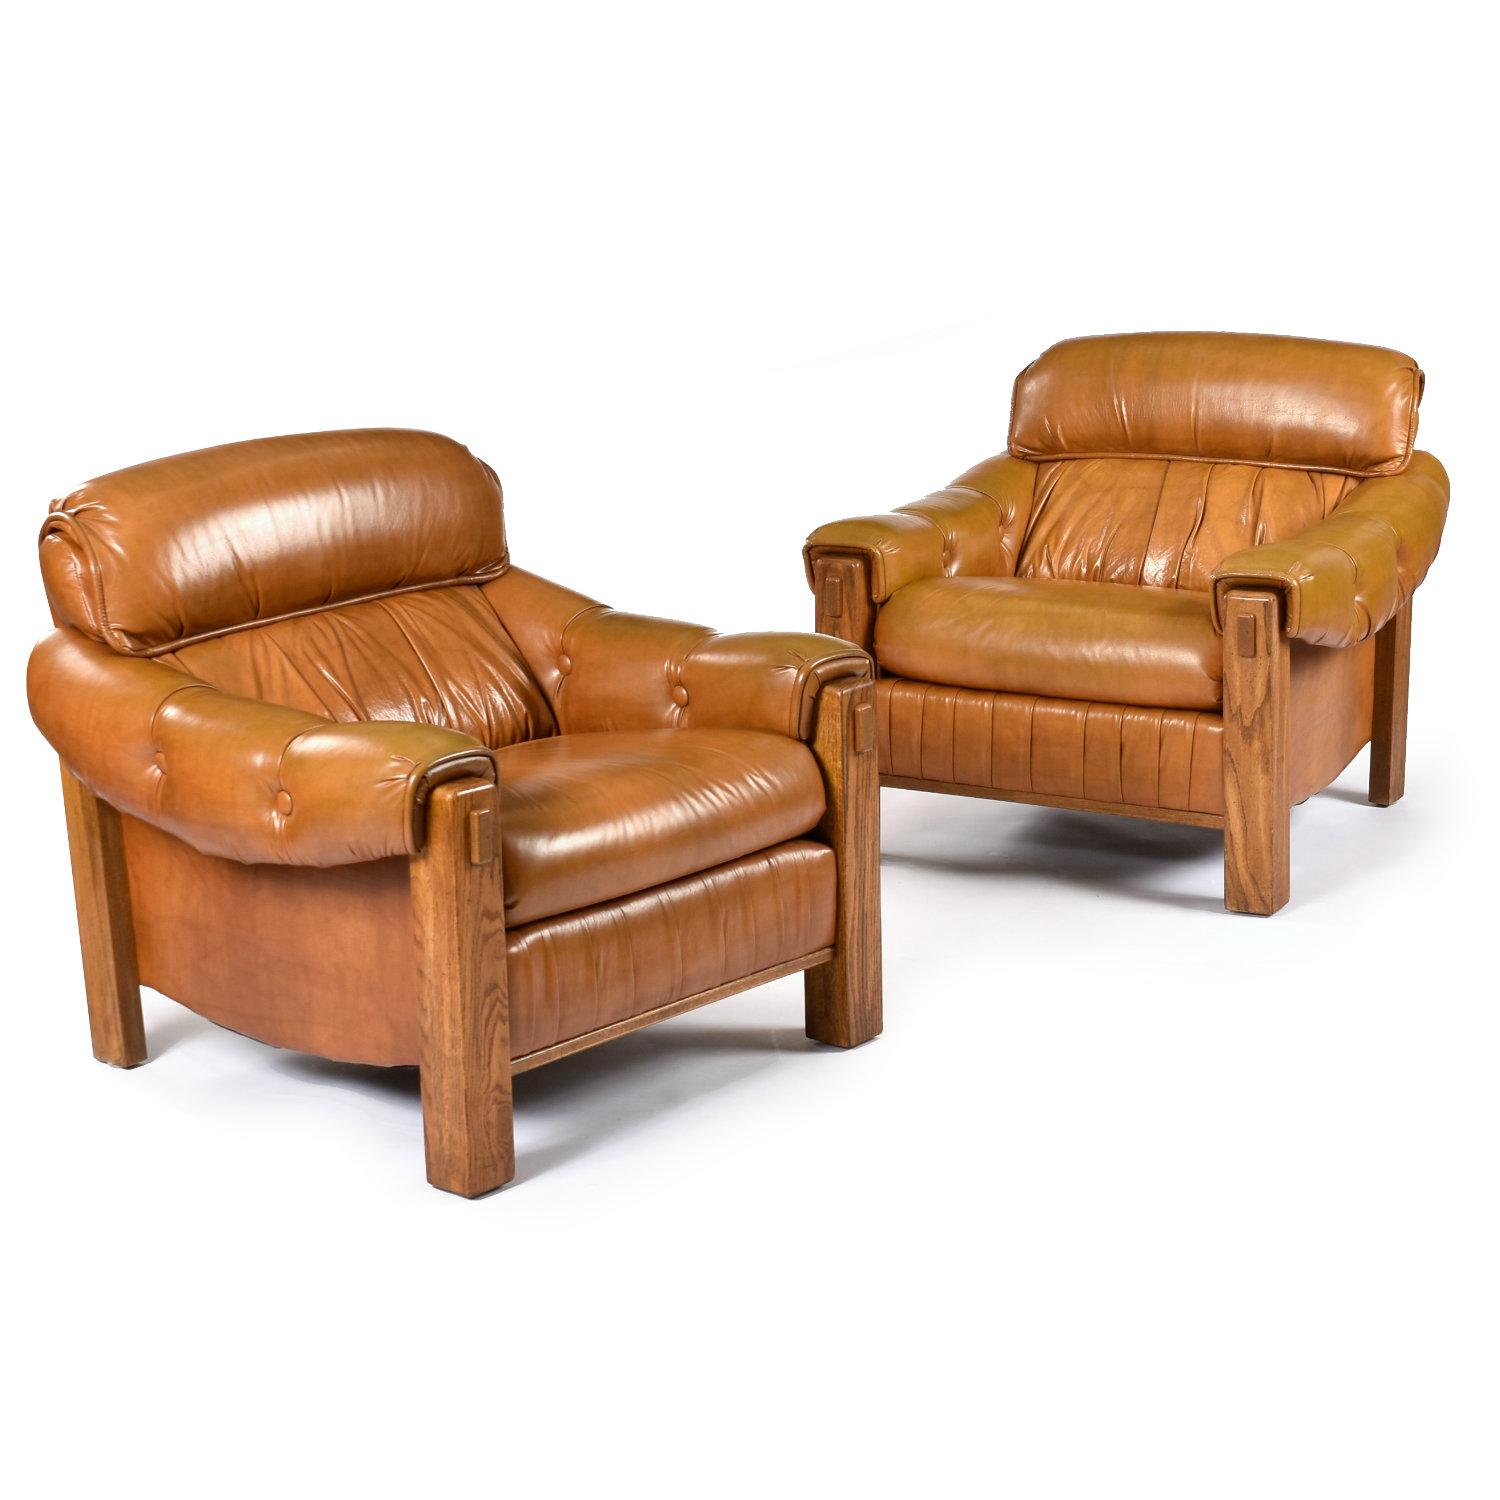 Sit back and relax in these amply stuffed vintage 1970s club chairs. The pair of armchairs have robust solid oak frames with a distinctive Nineteen-Laties flyspeck finish. The generously stuffed chairs perfectly suit today’s level of comfort. These